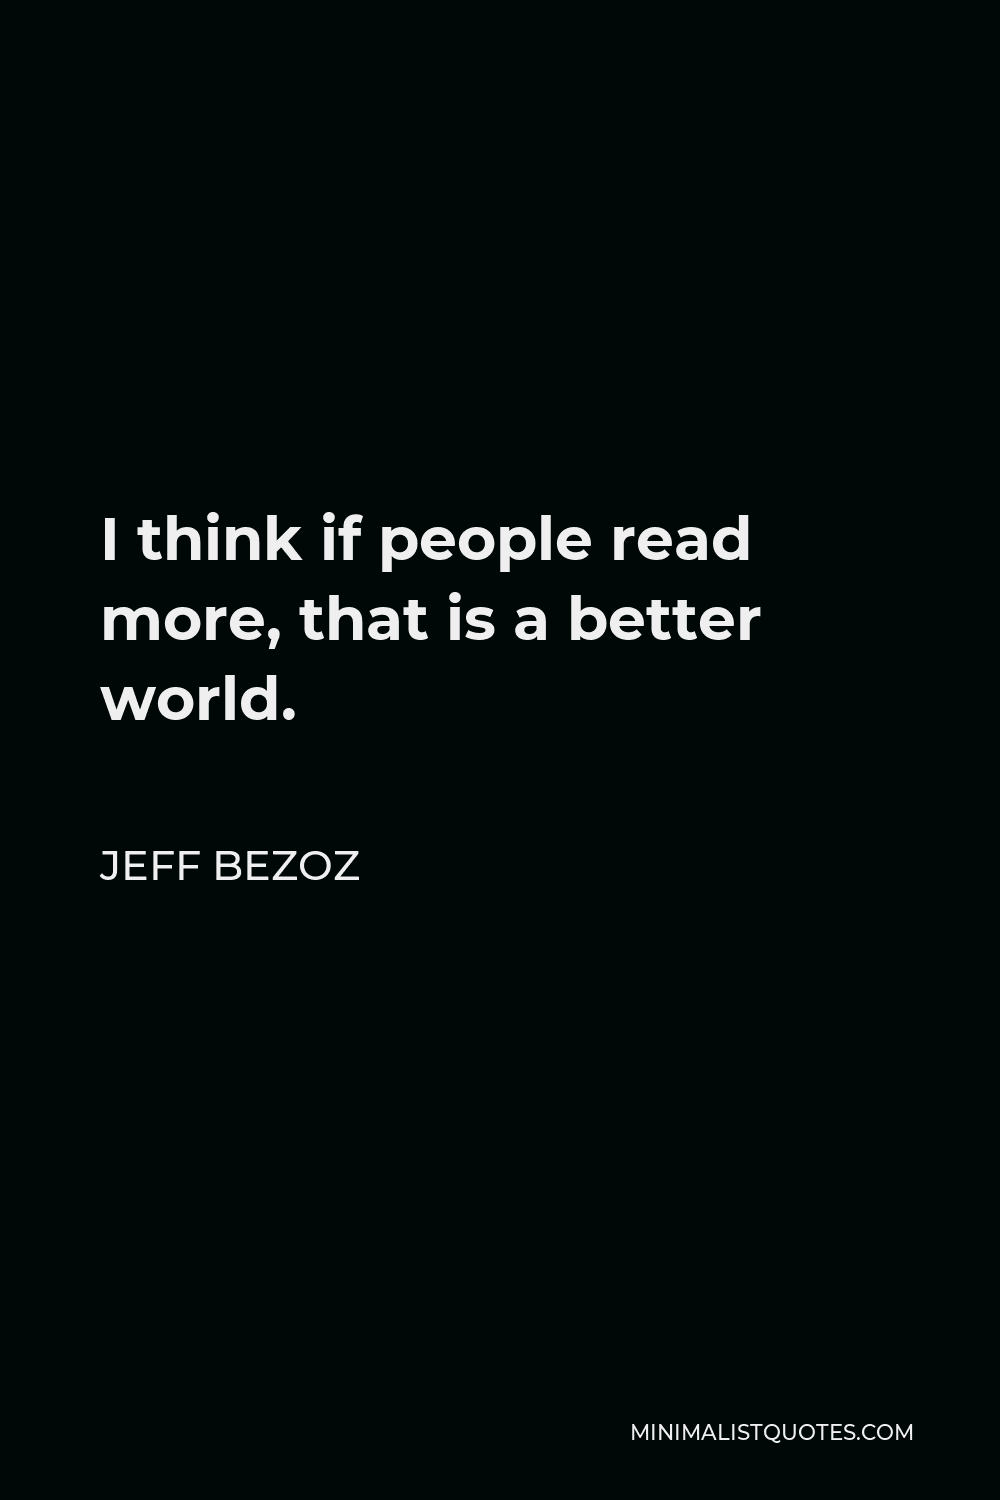 Jeff Bezoz Quote - I think if people read more, that is a better world.